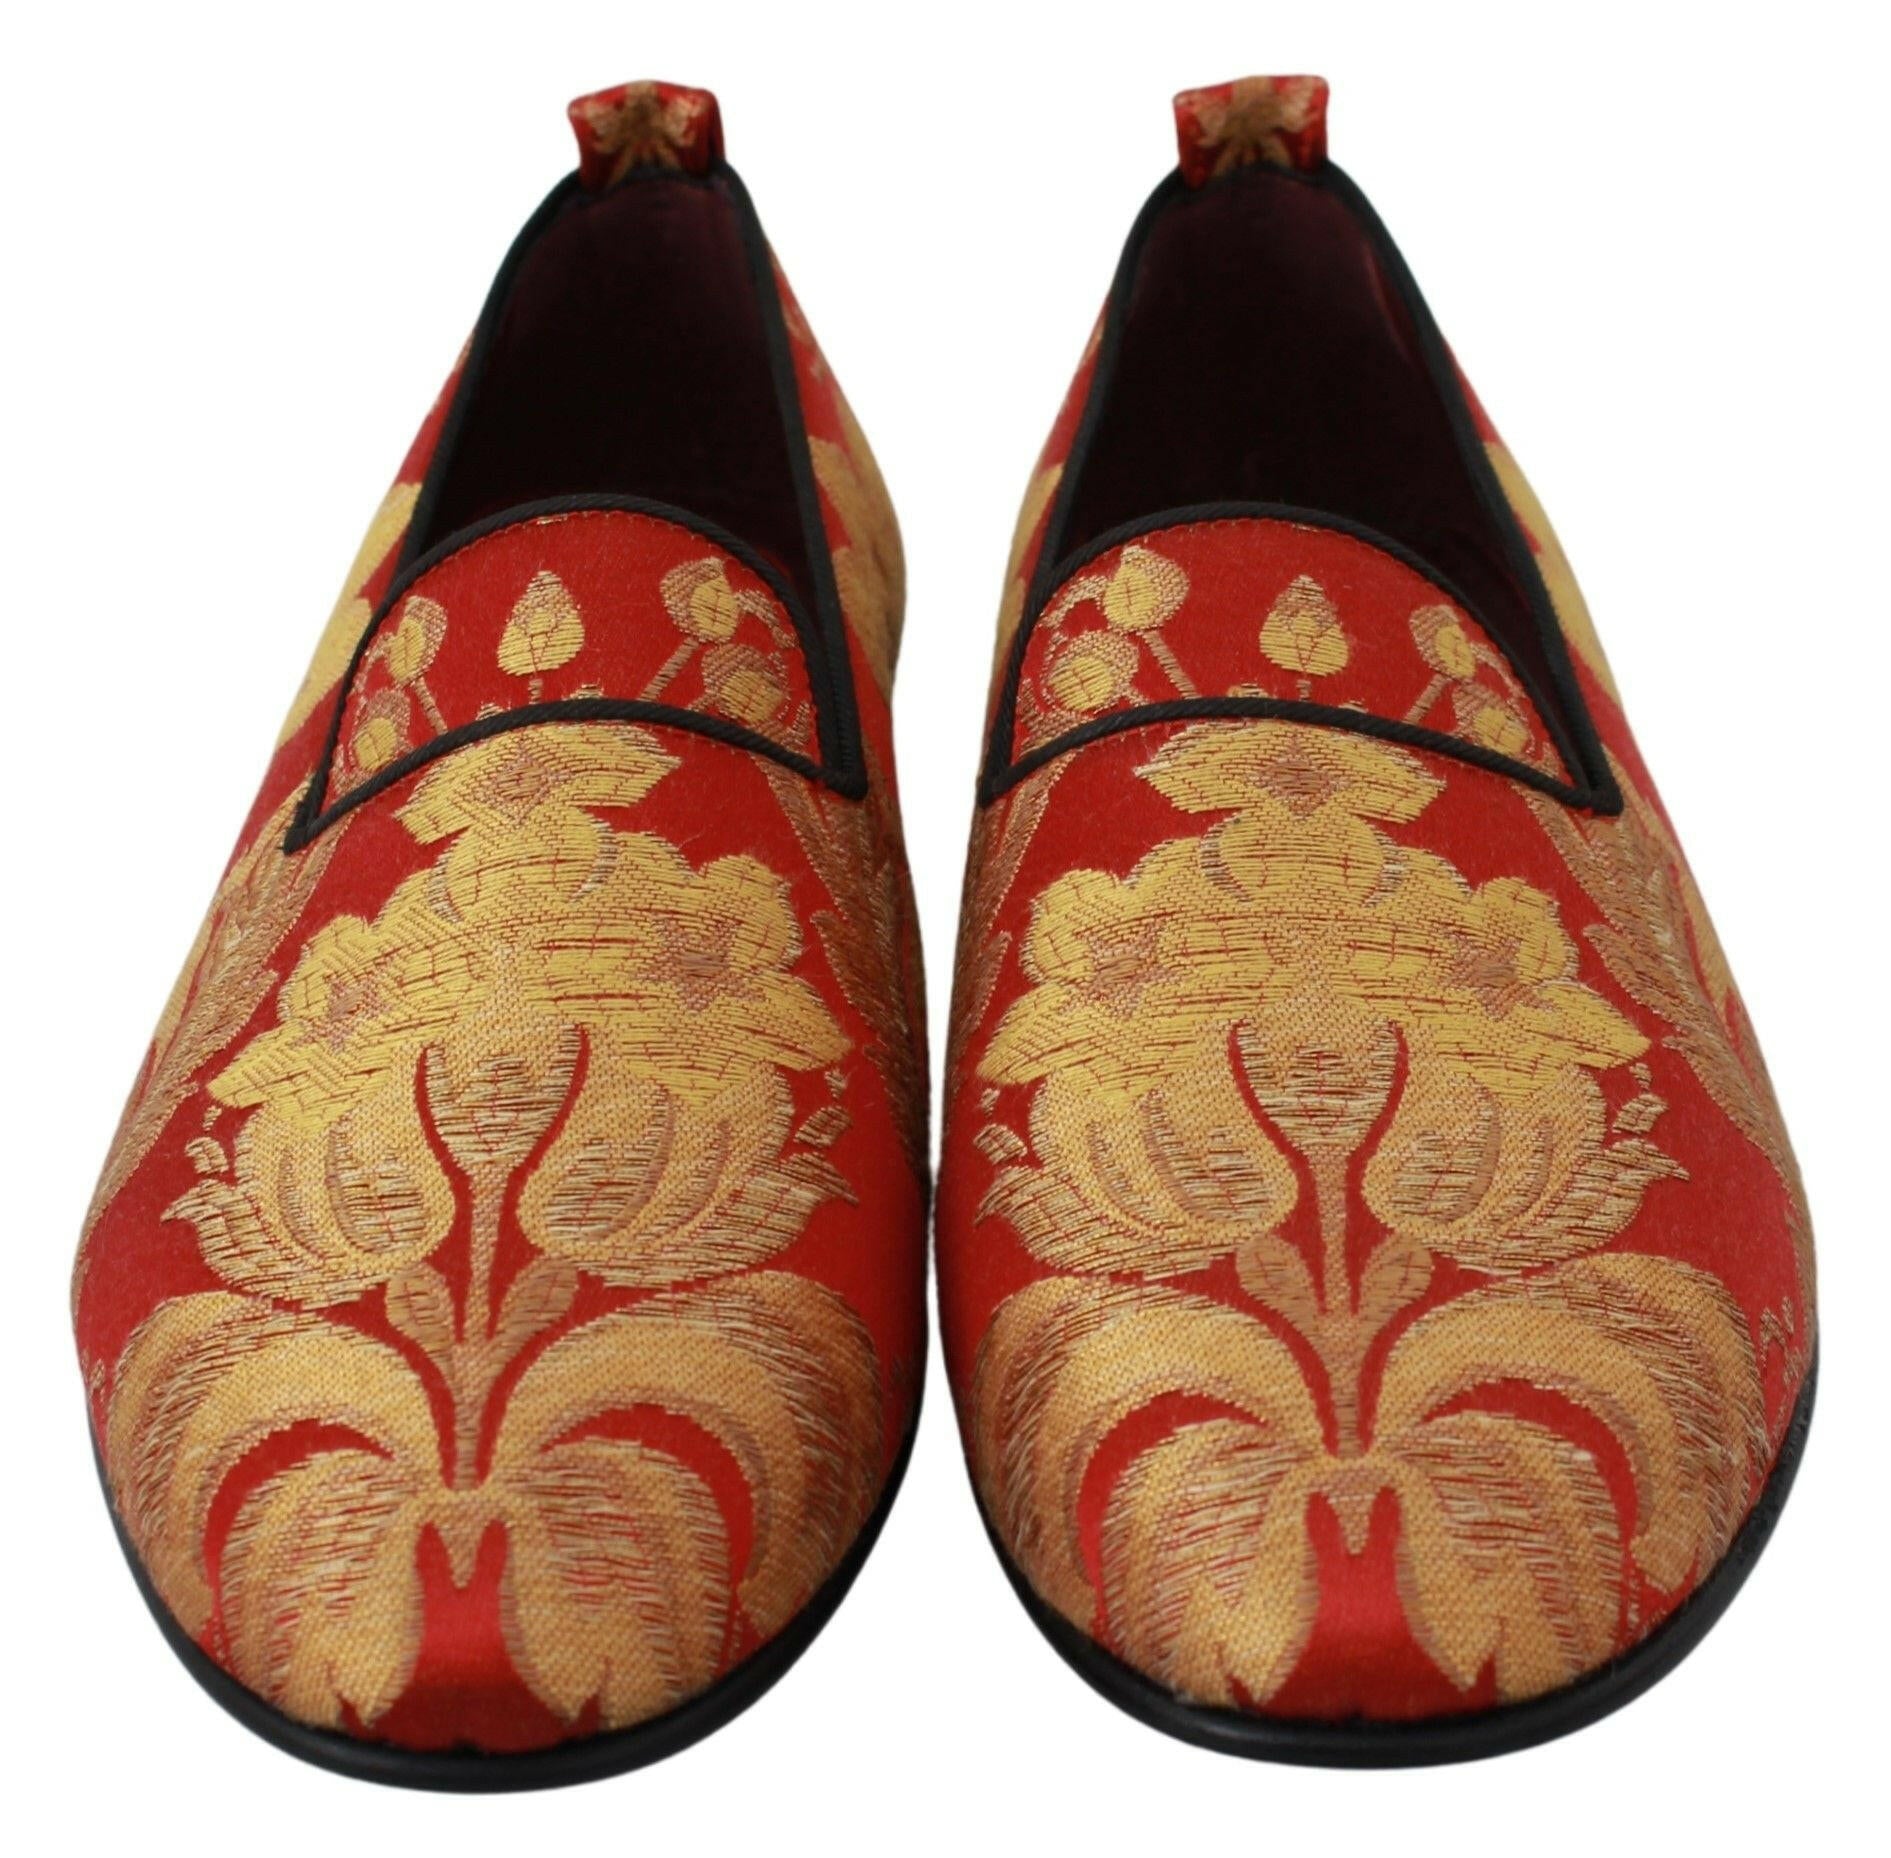 Dolce & Gabbana Red Gold Brocade Slippers Loafers Shoes - GENUINE AUTHENTIC BRAND LLC  